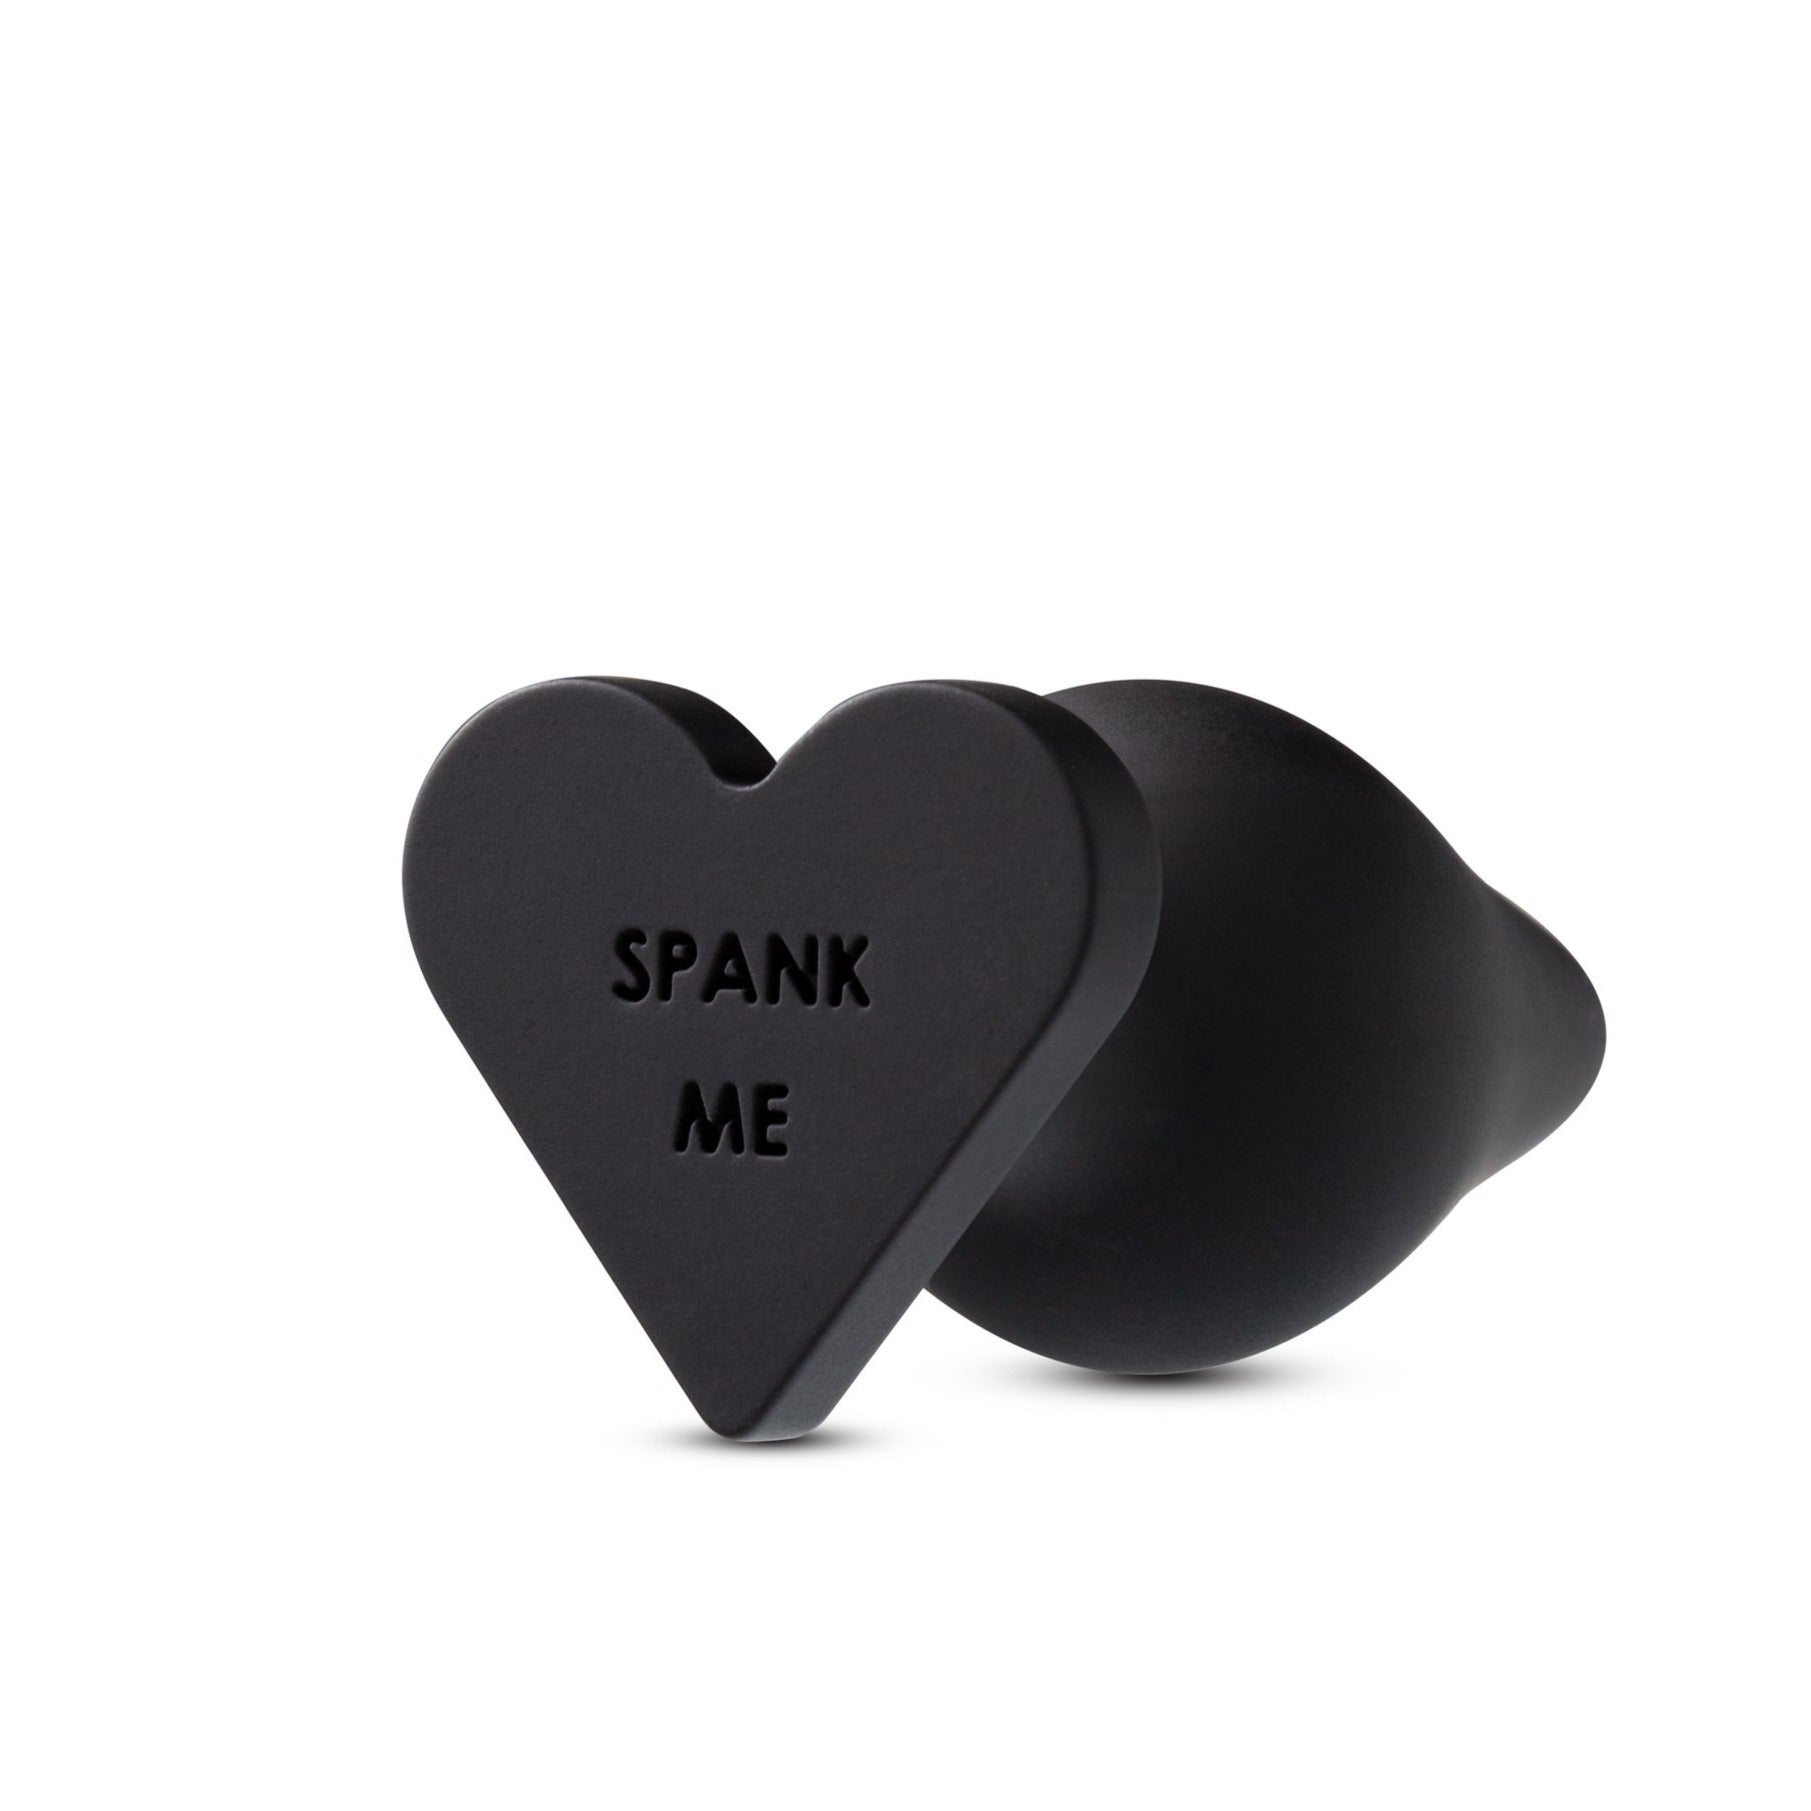 Heart shaped base that reads "Spank Me"